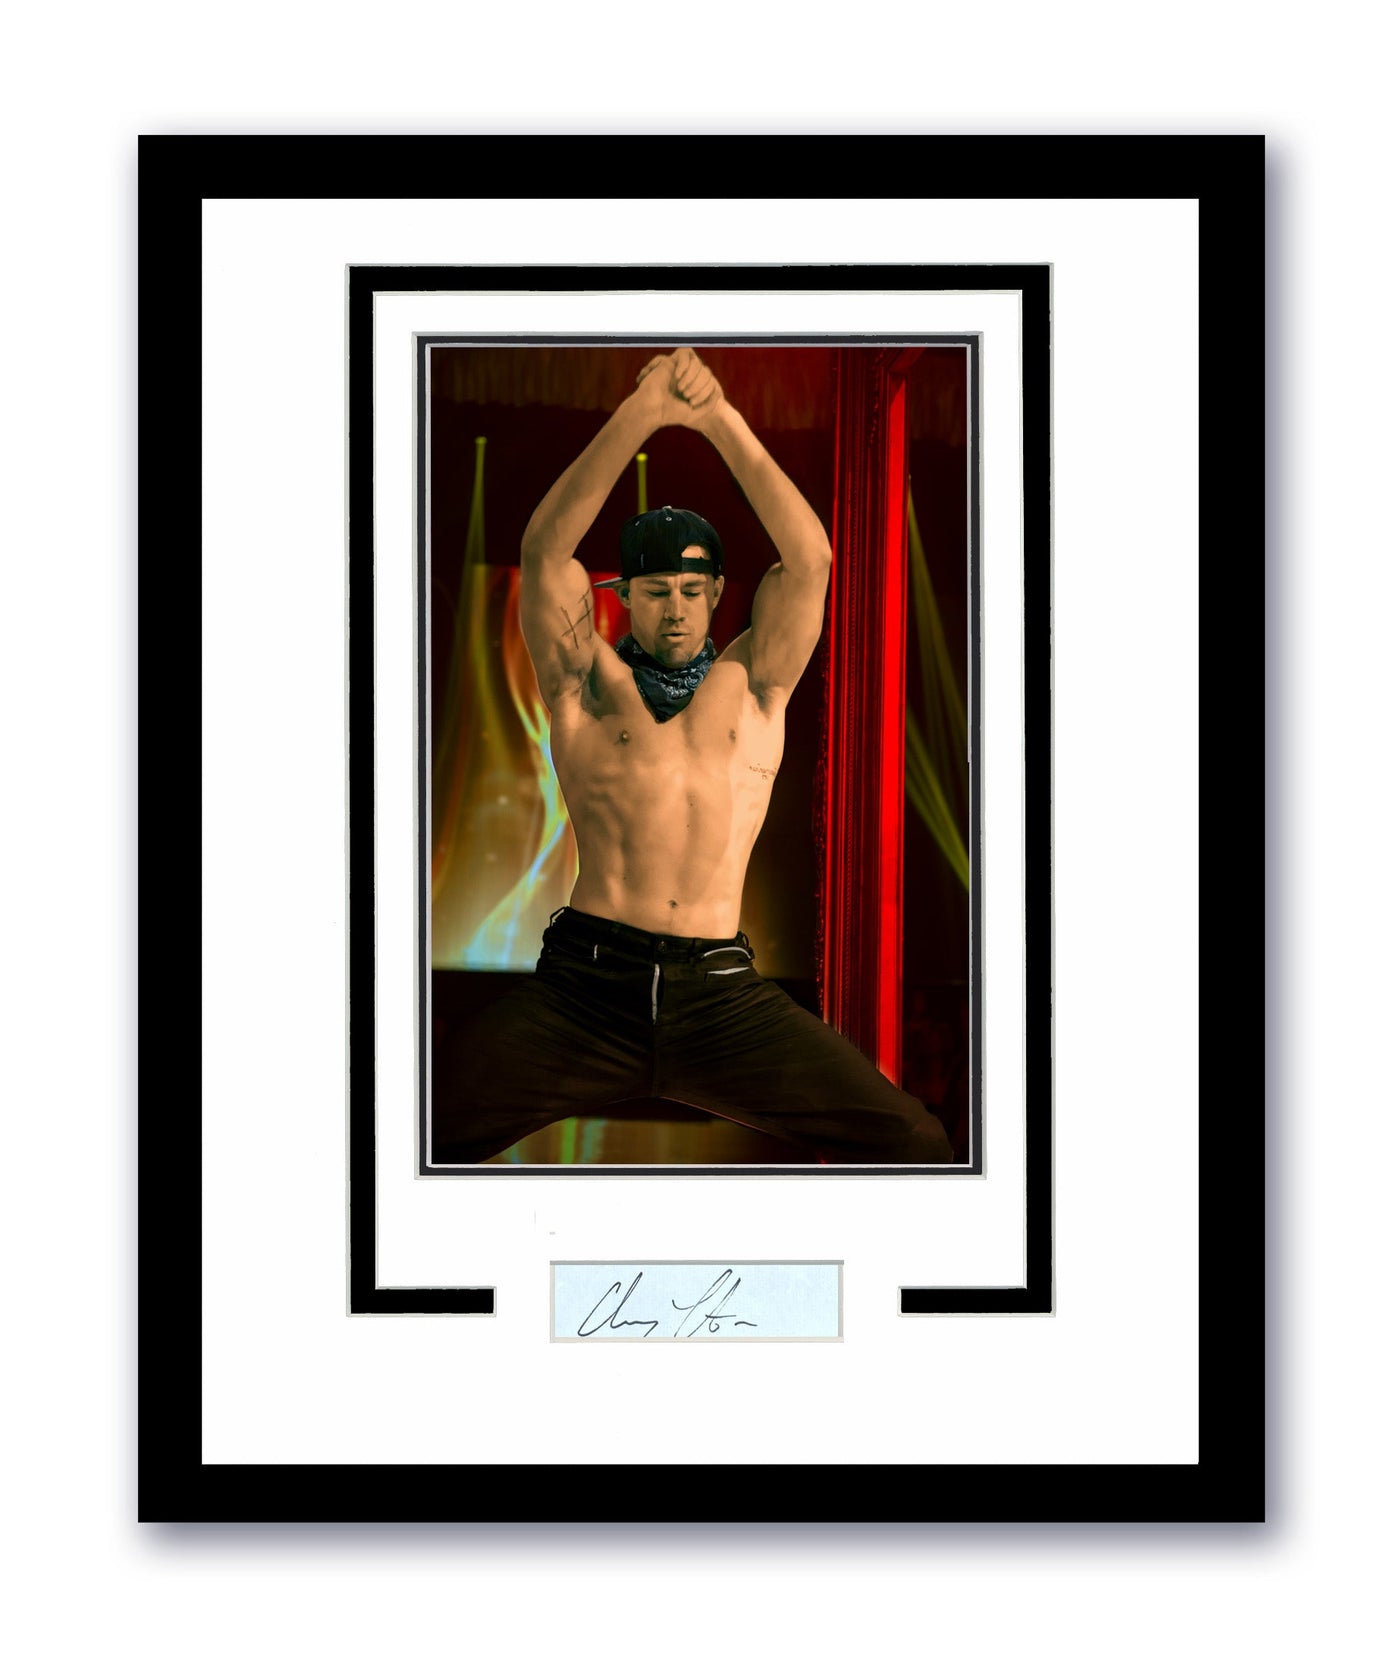 Magic Mike Channing Tatum Autographed Signed 11x14 Framed Poster Photo ACOA